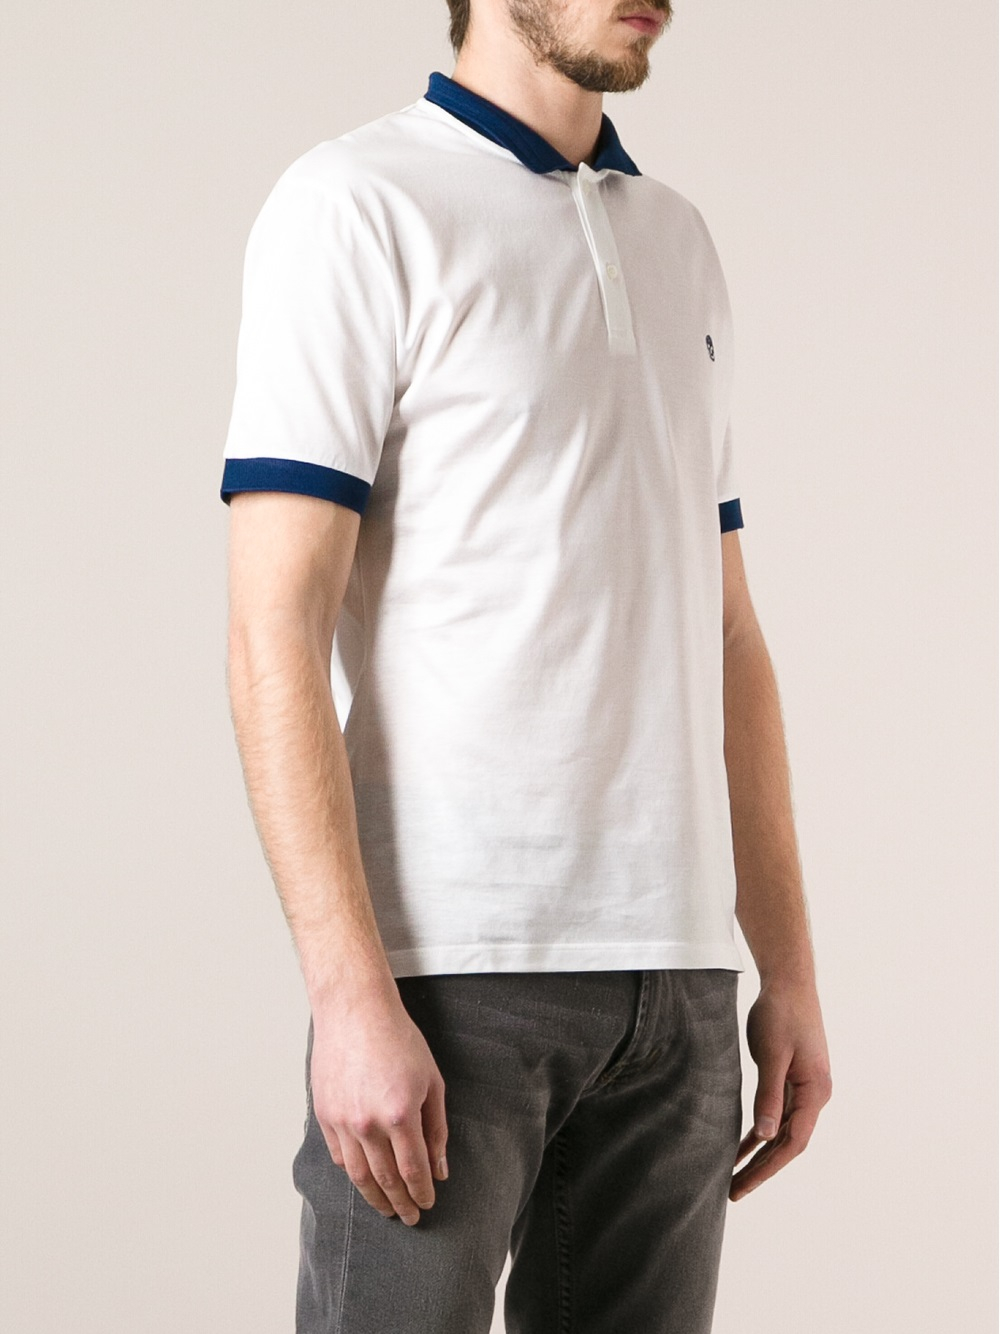 Lyst - Alexander Mcqueen Classic Polo Shirt in White for Men